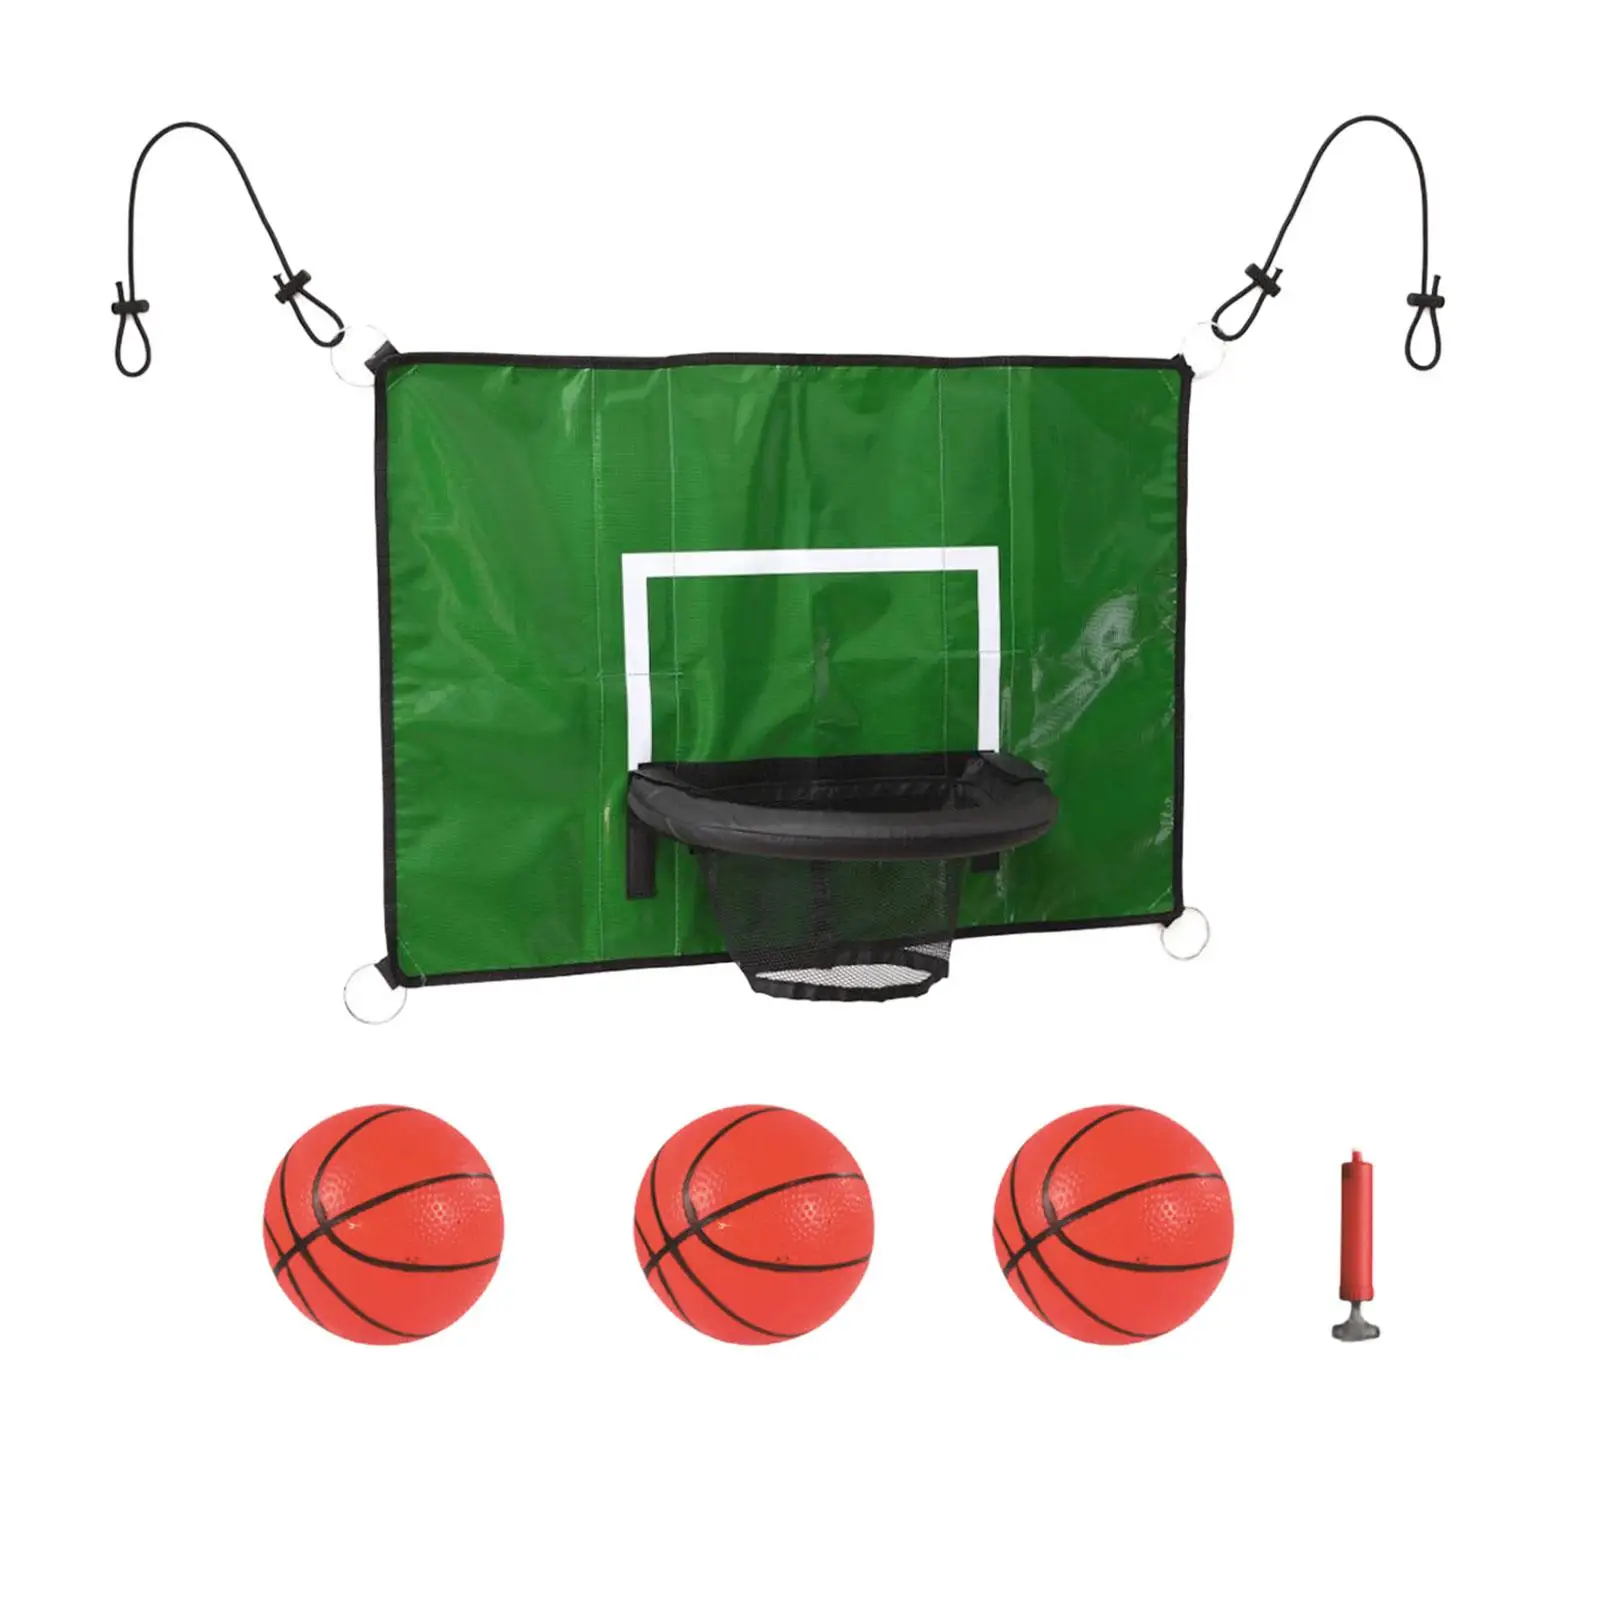 

Trampoline Basketball Hoop Set with Mini Basketballs Universal for Backyard Game Accessory Easily Install Waterproof Portable